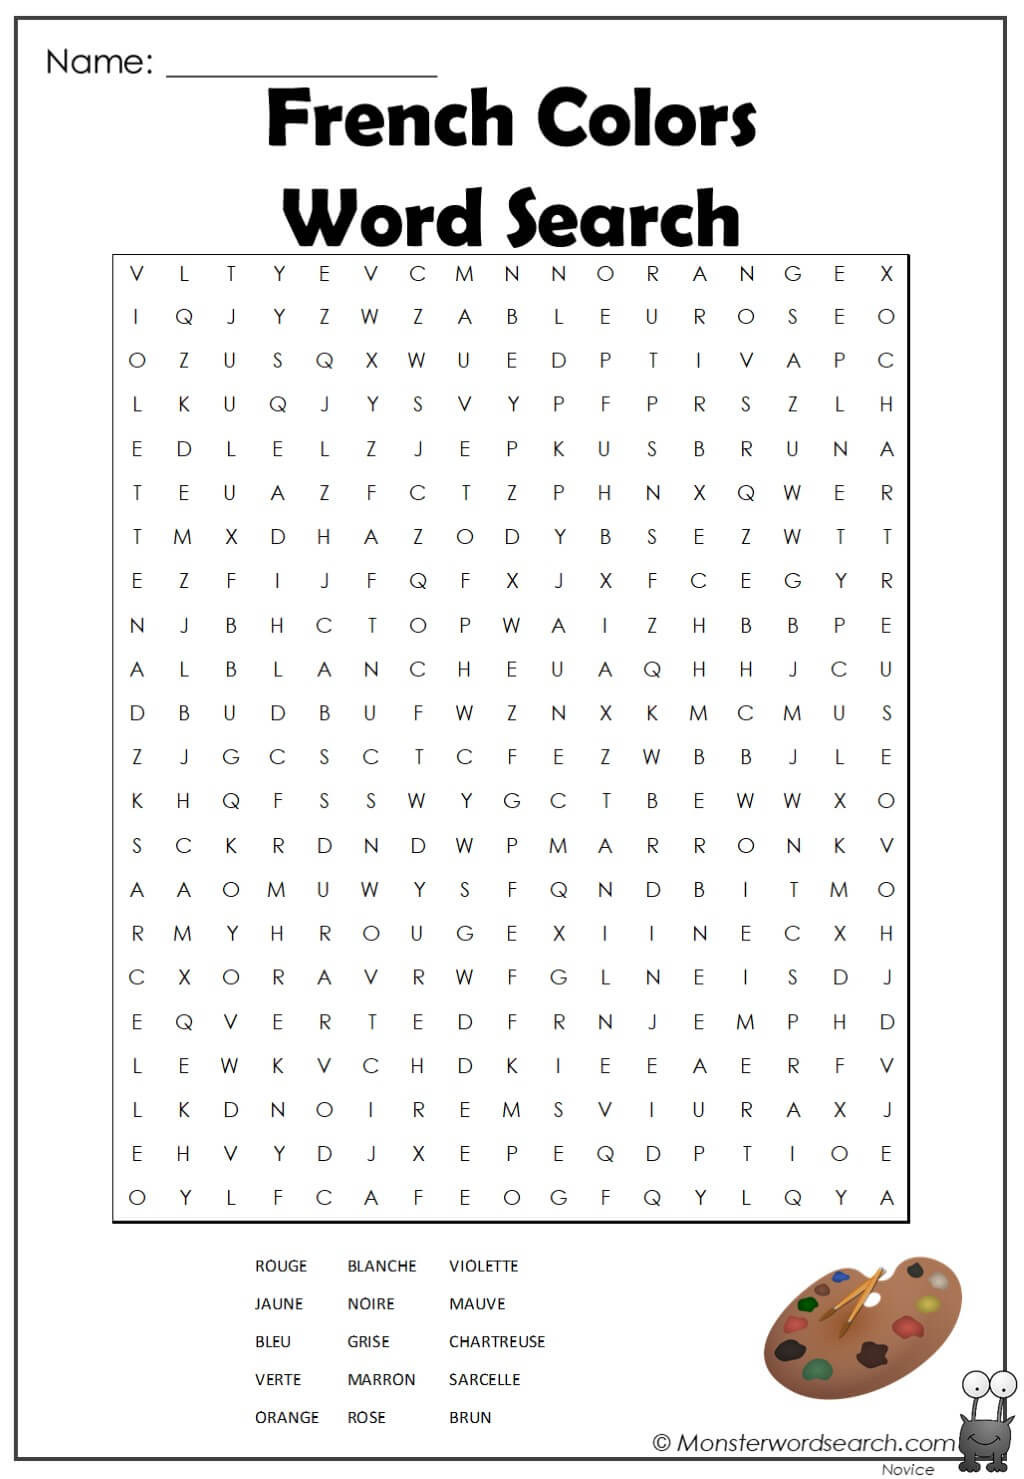 french-word-searches-free-printable-printable-templates